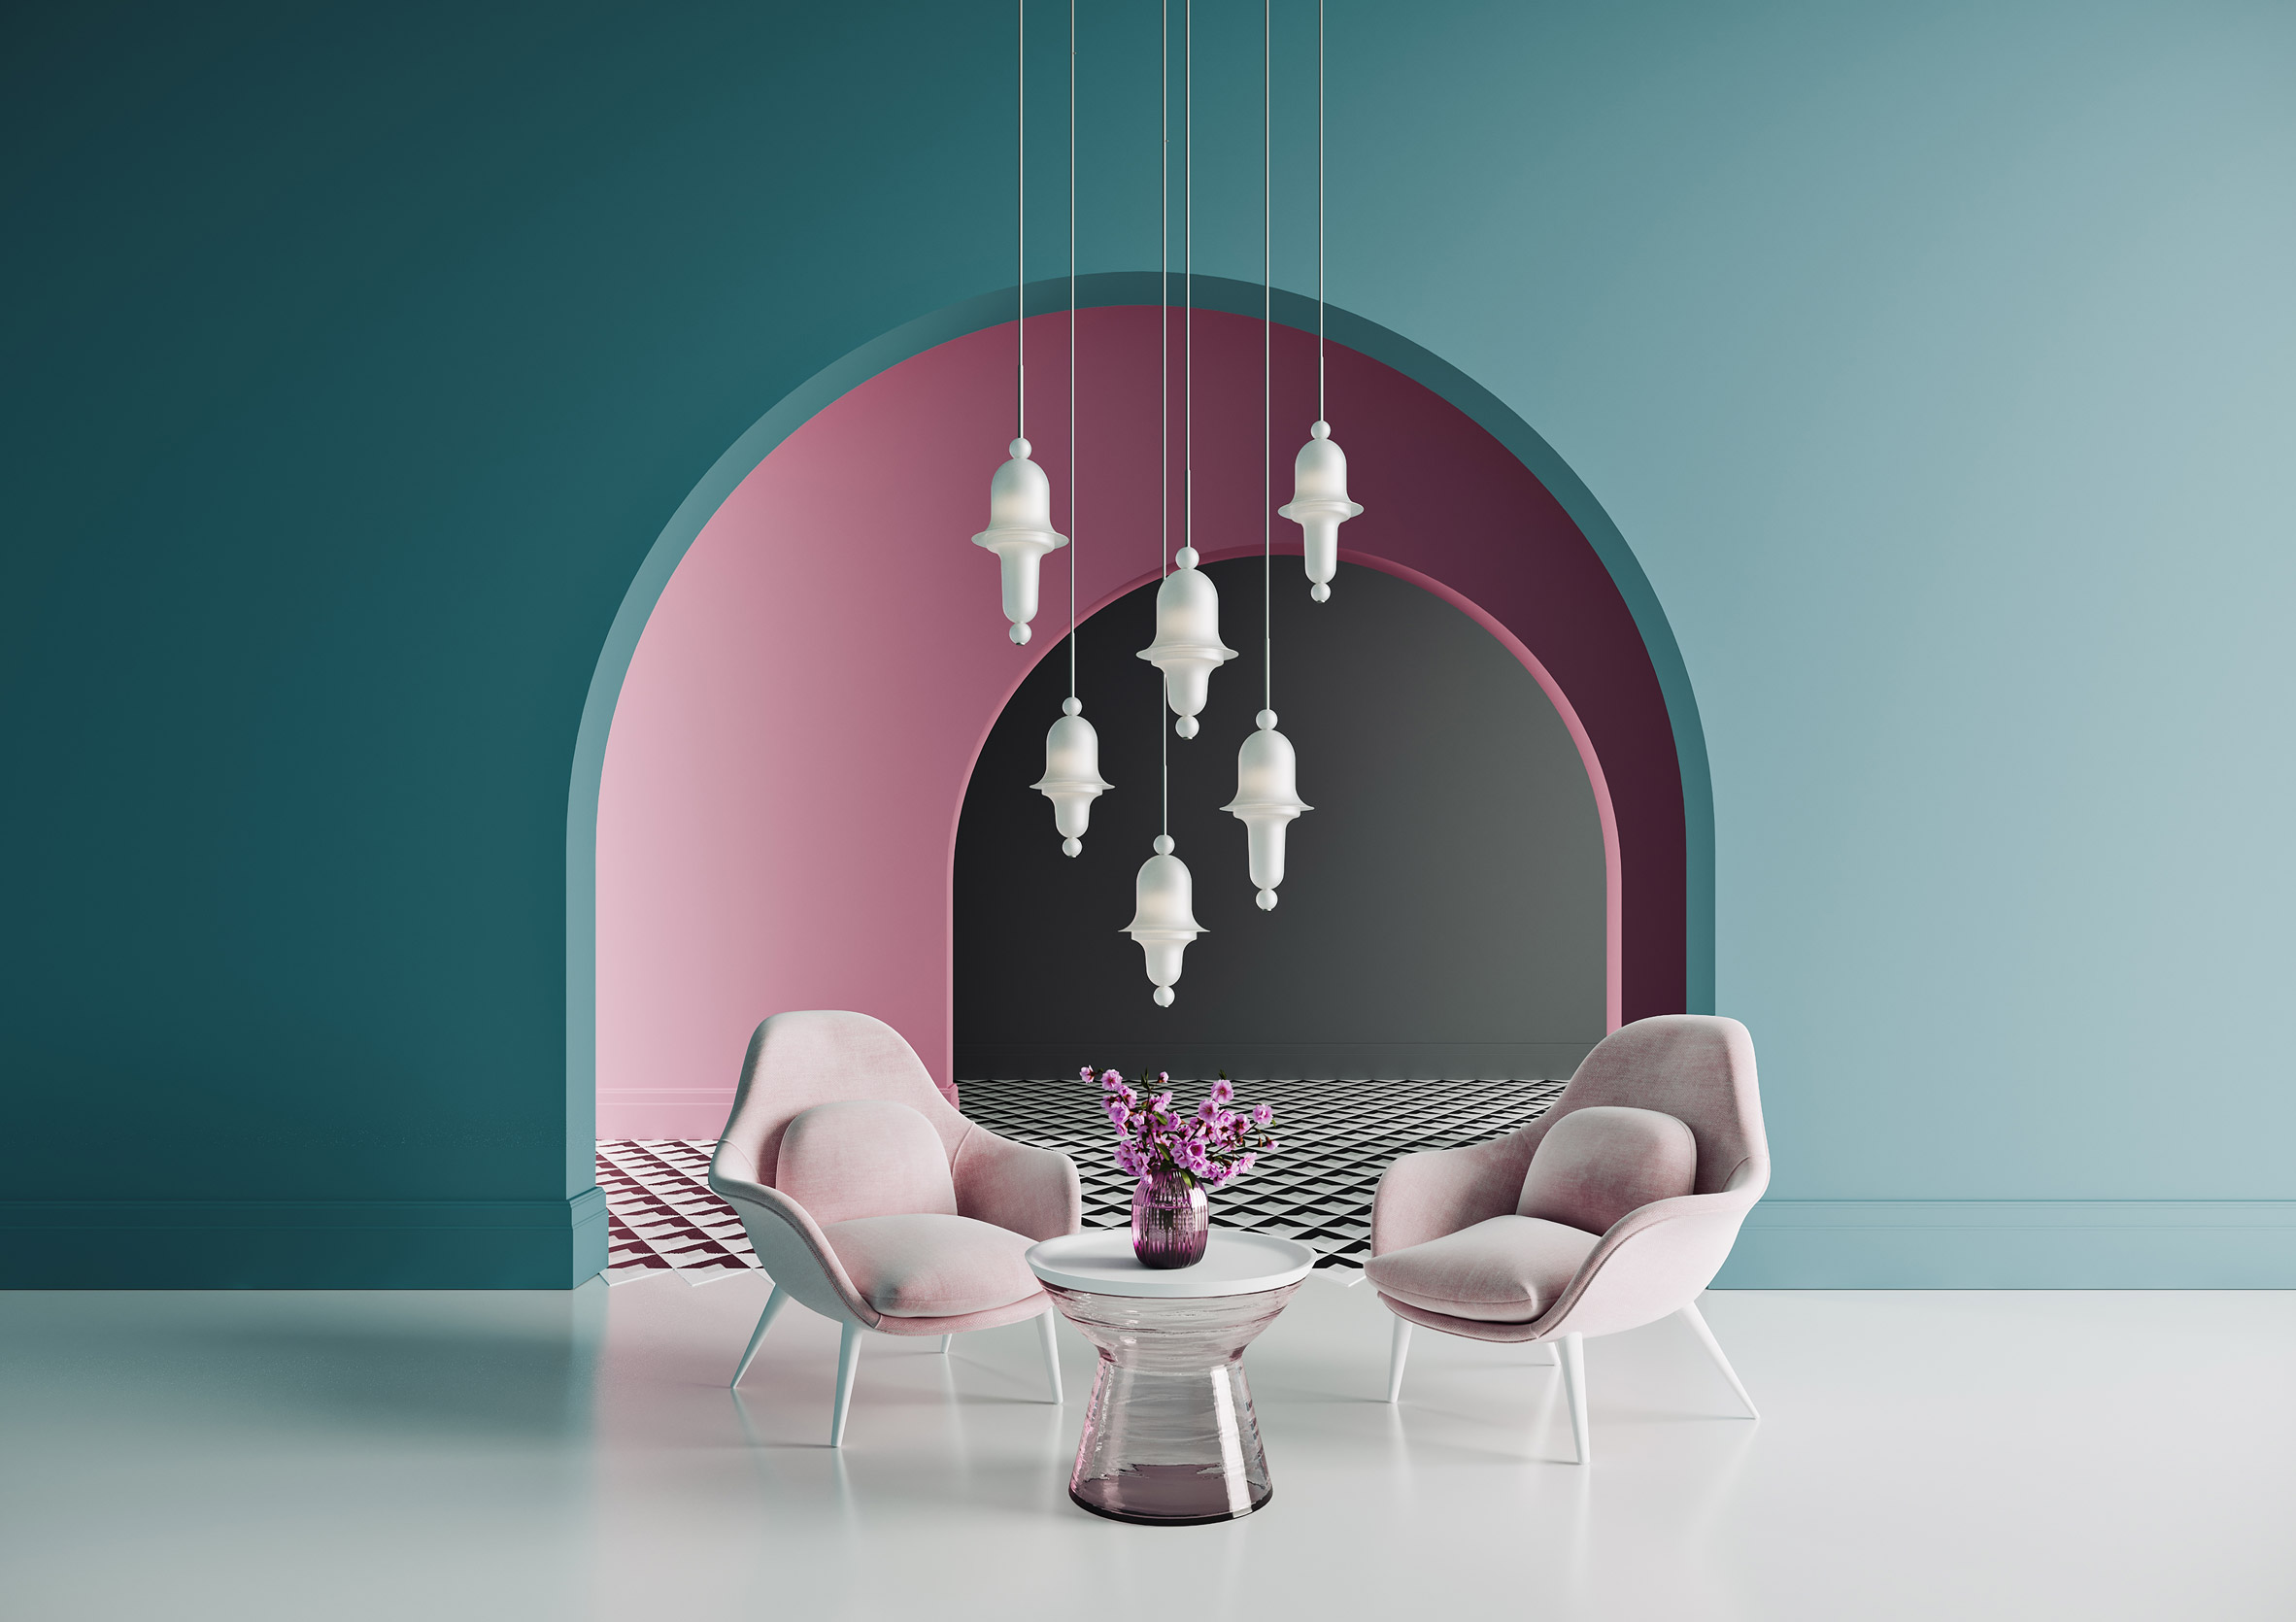 Preciosa launches bell-shaped glass light by Dima Loginoff